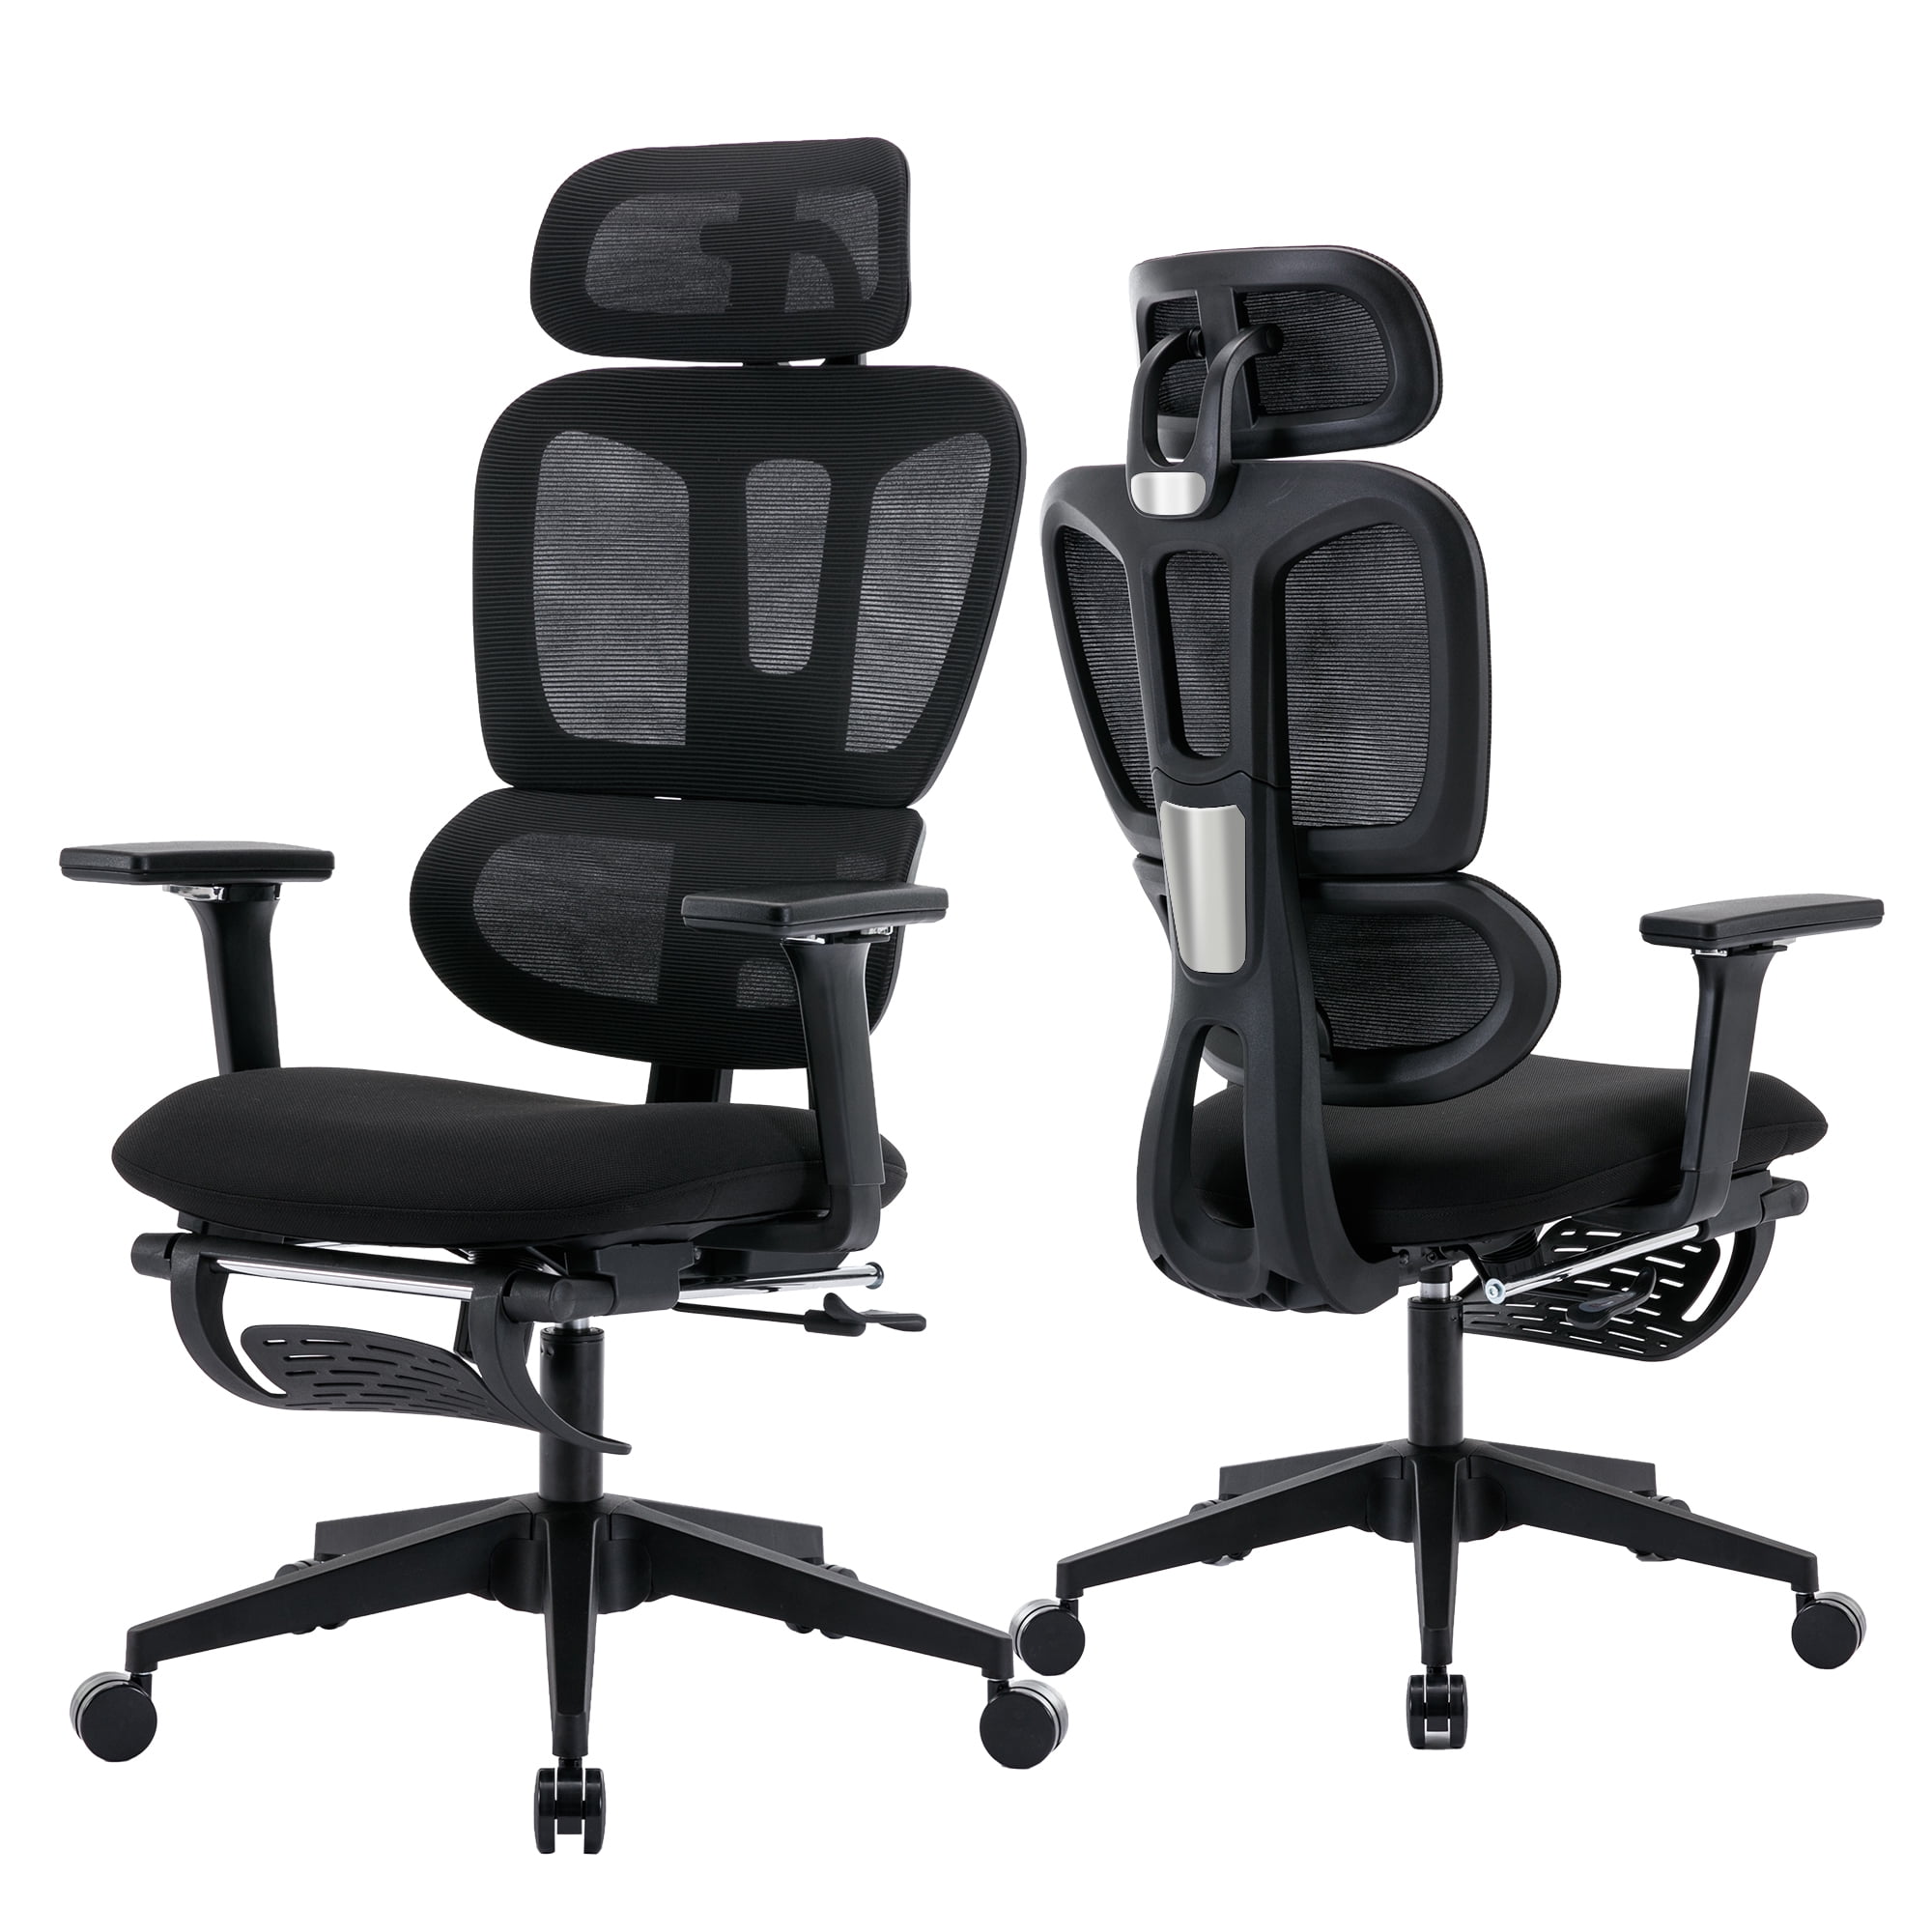  Office Chair with Foot Rest, Rubber Wheels Desk Chair with  Lumbar Support, Adjustable Headrest & 3D Armrest, Mesh Computer Chair for  Adults, Reclining Home Office Chair BlackGray : Home & Kitchen